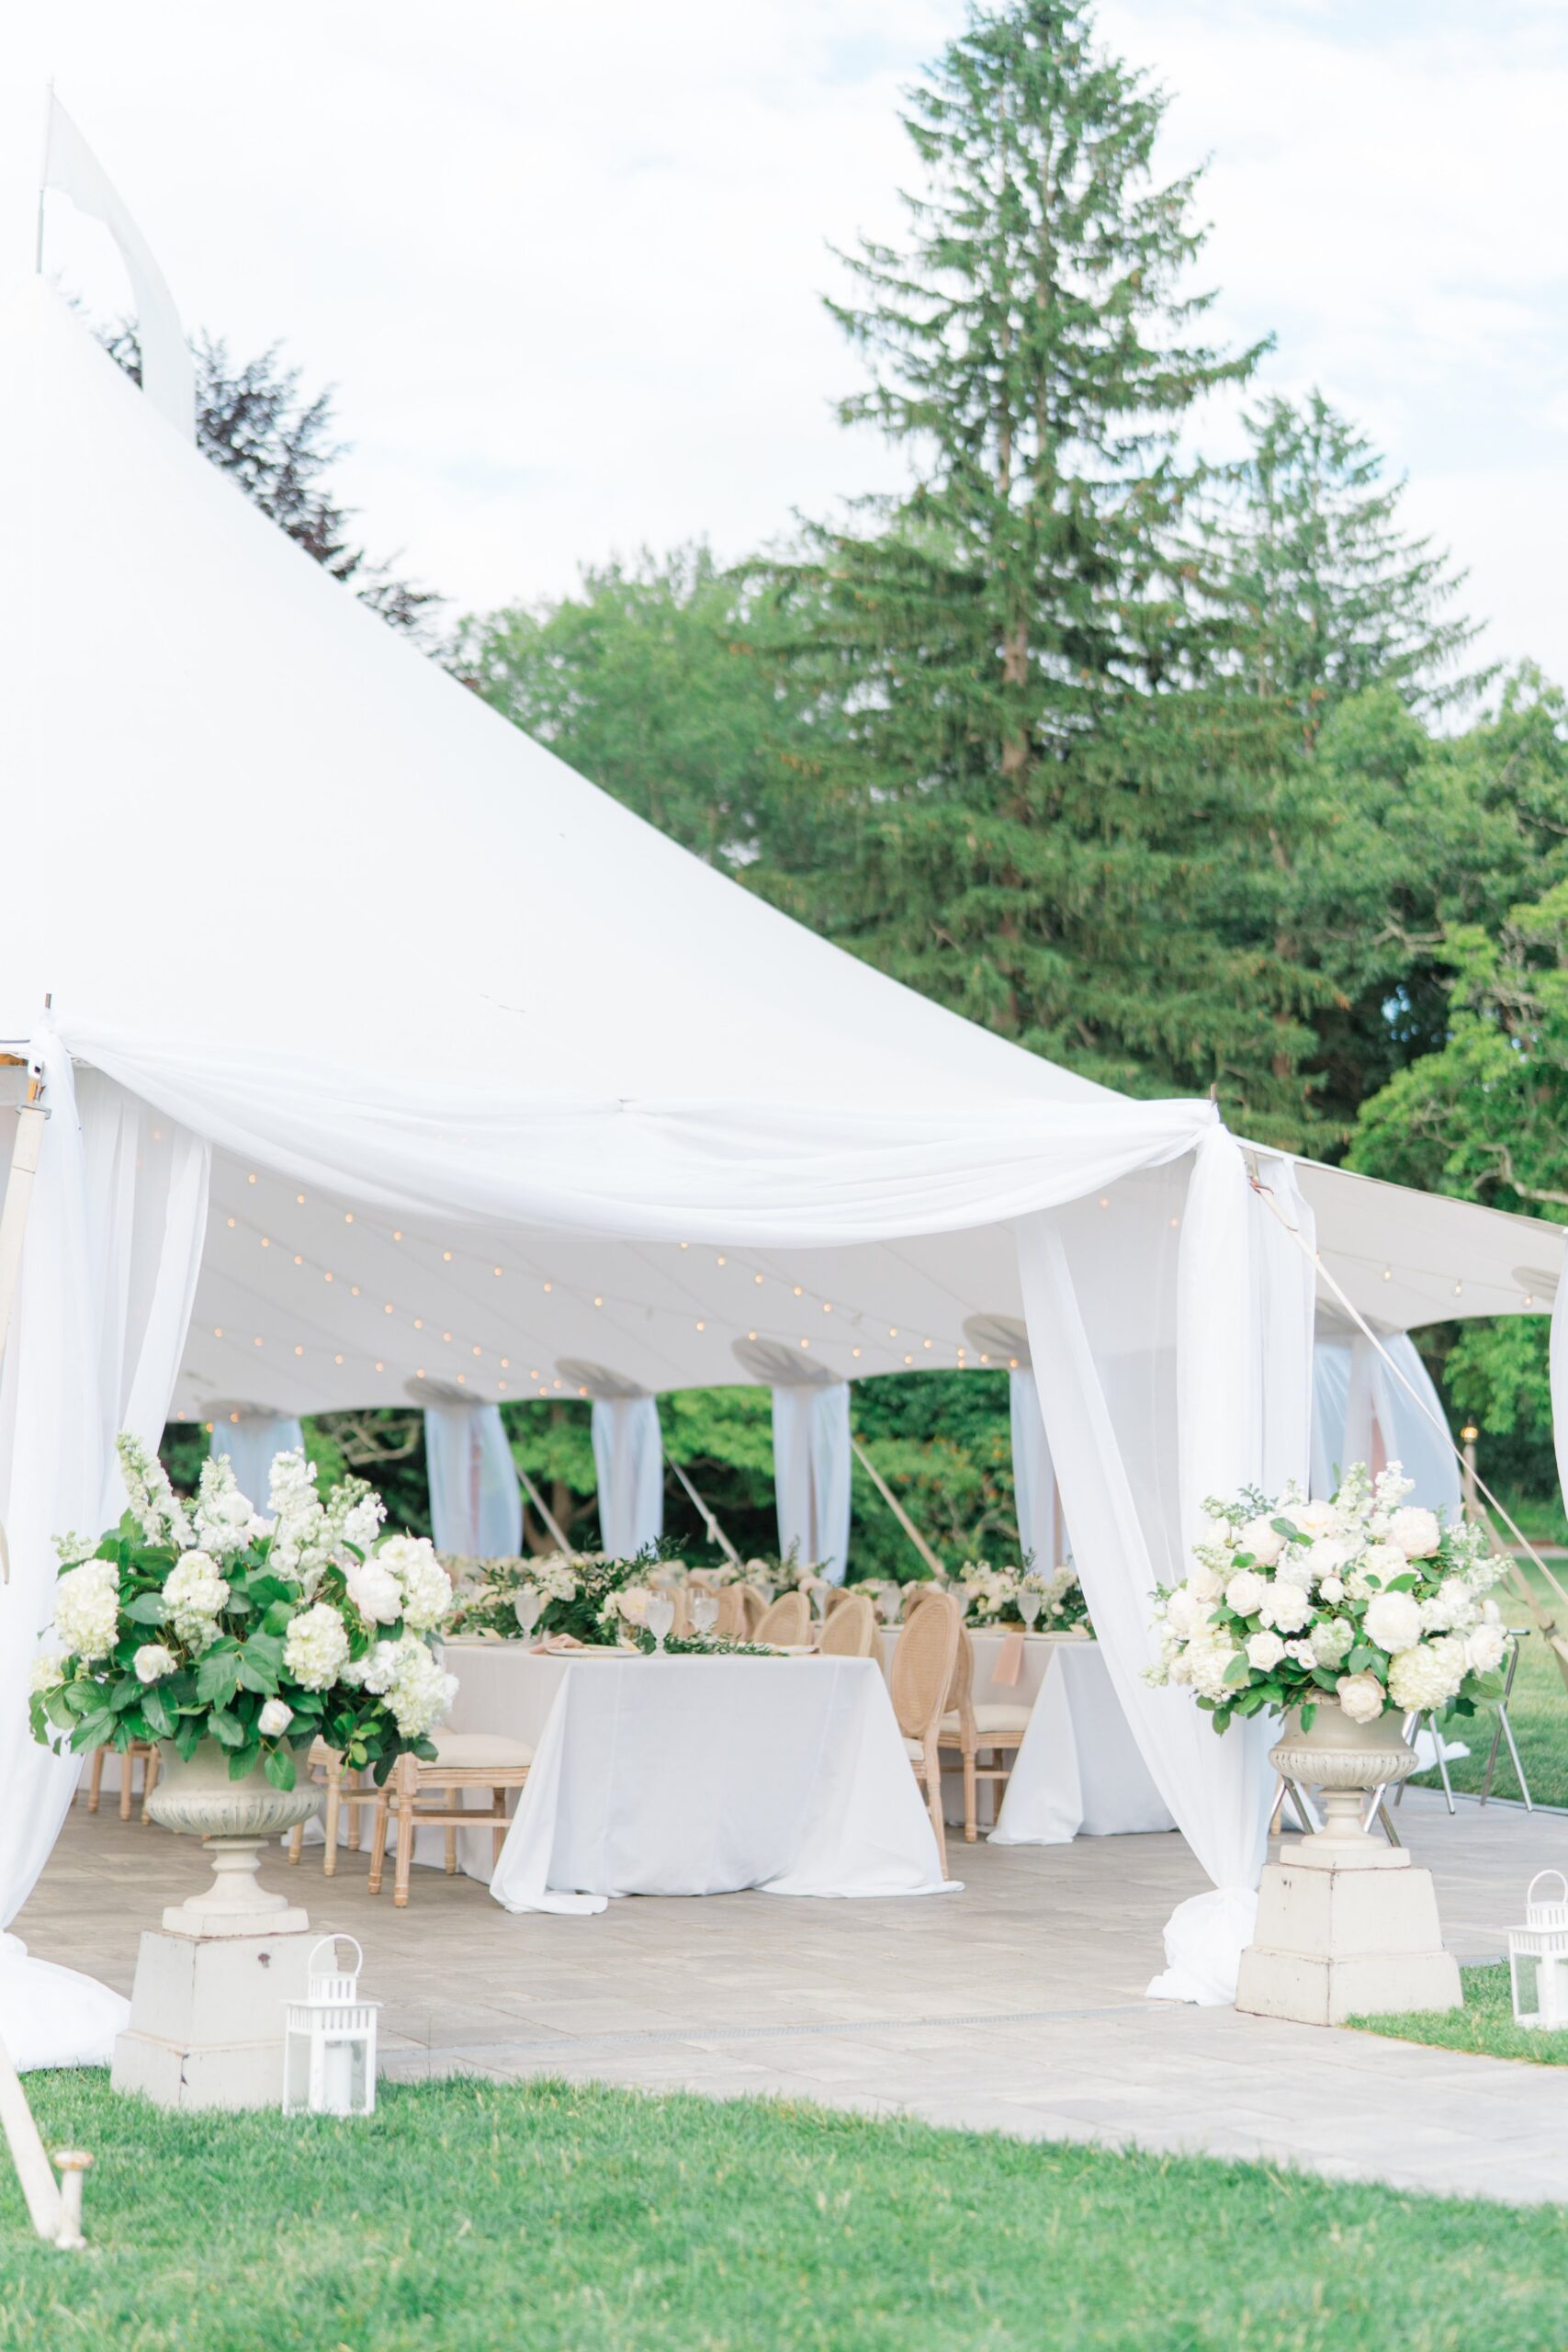 sperry tent with accents of white draping and pedestal flowers at tent entrance.